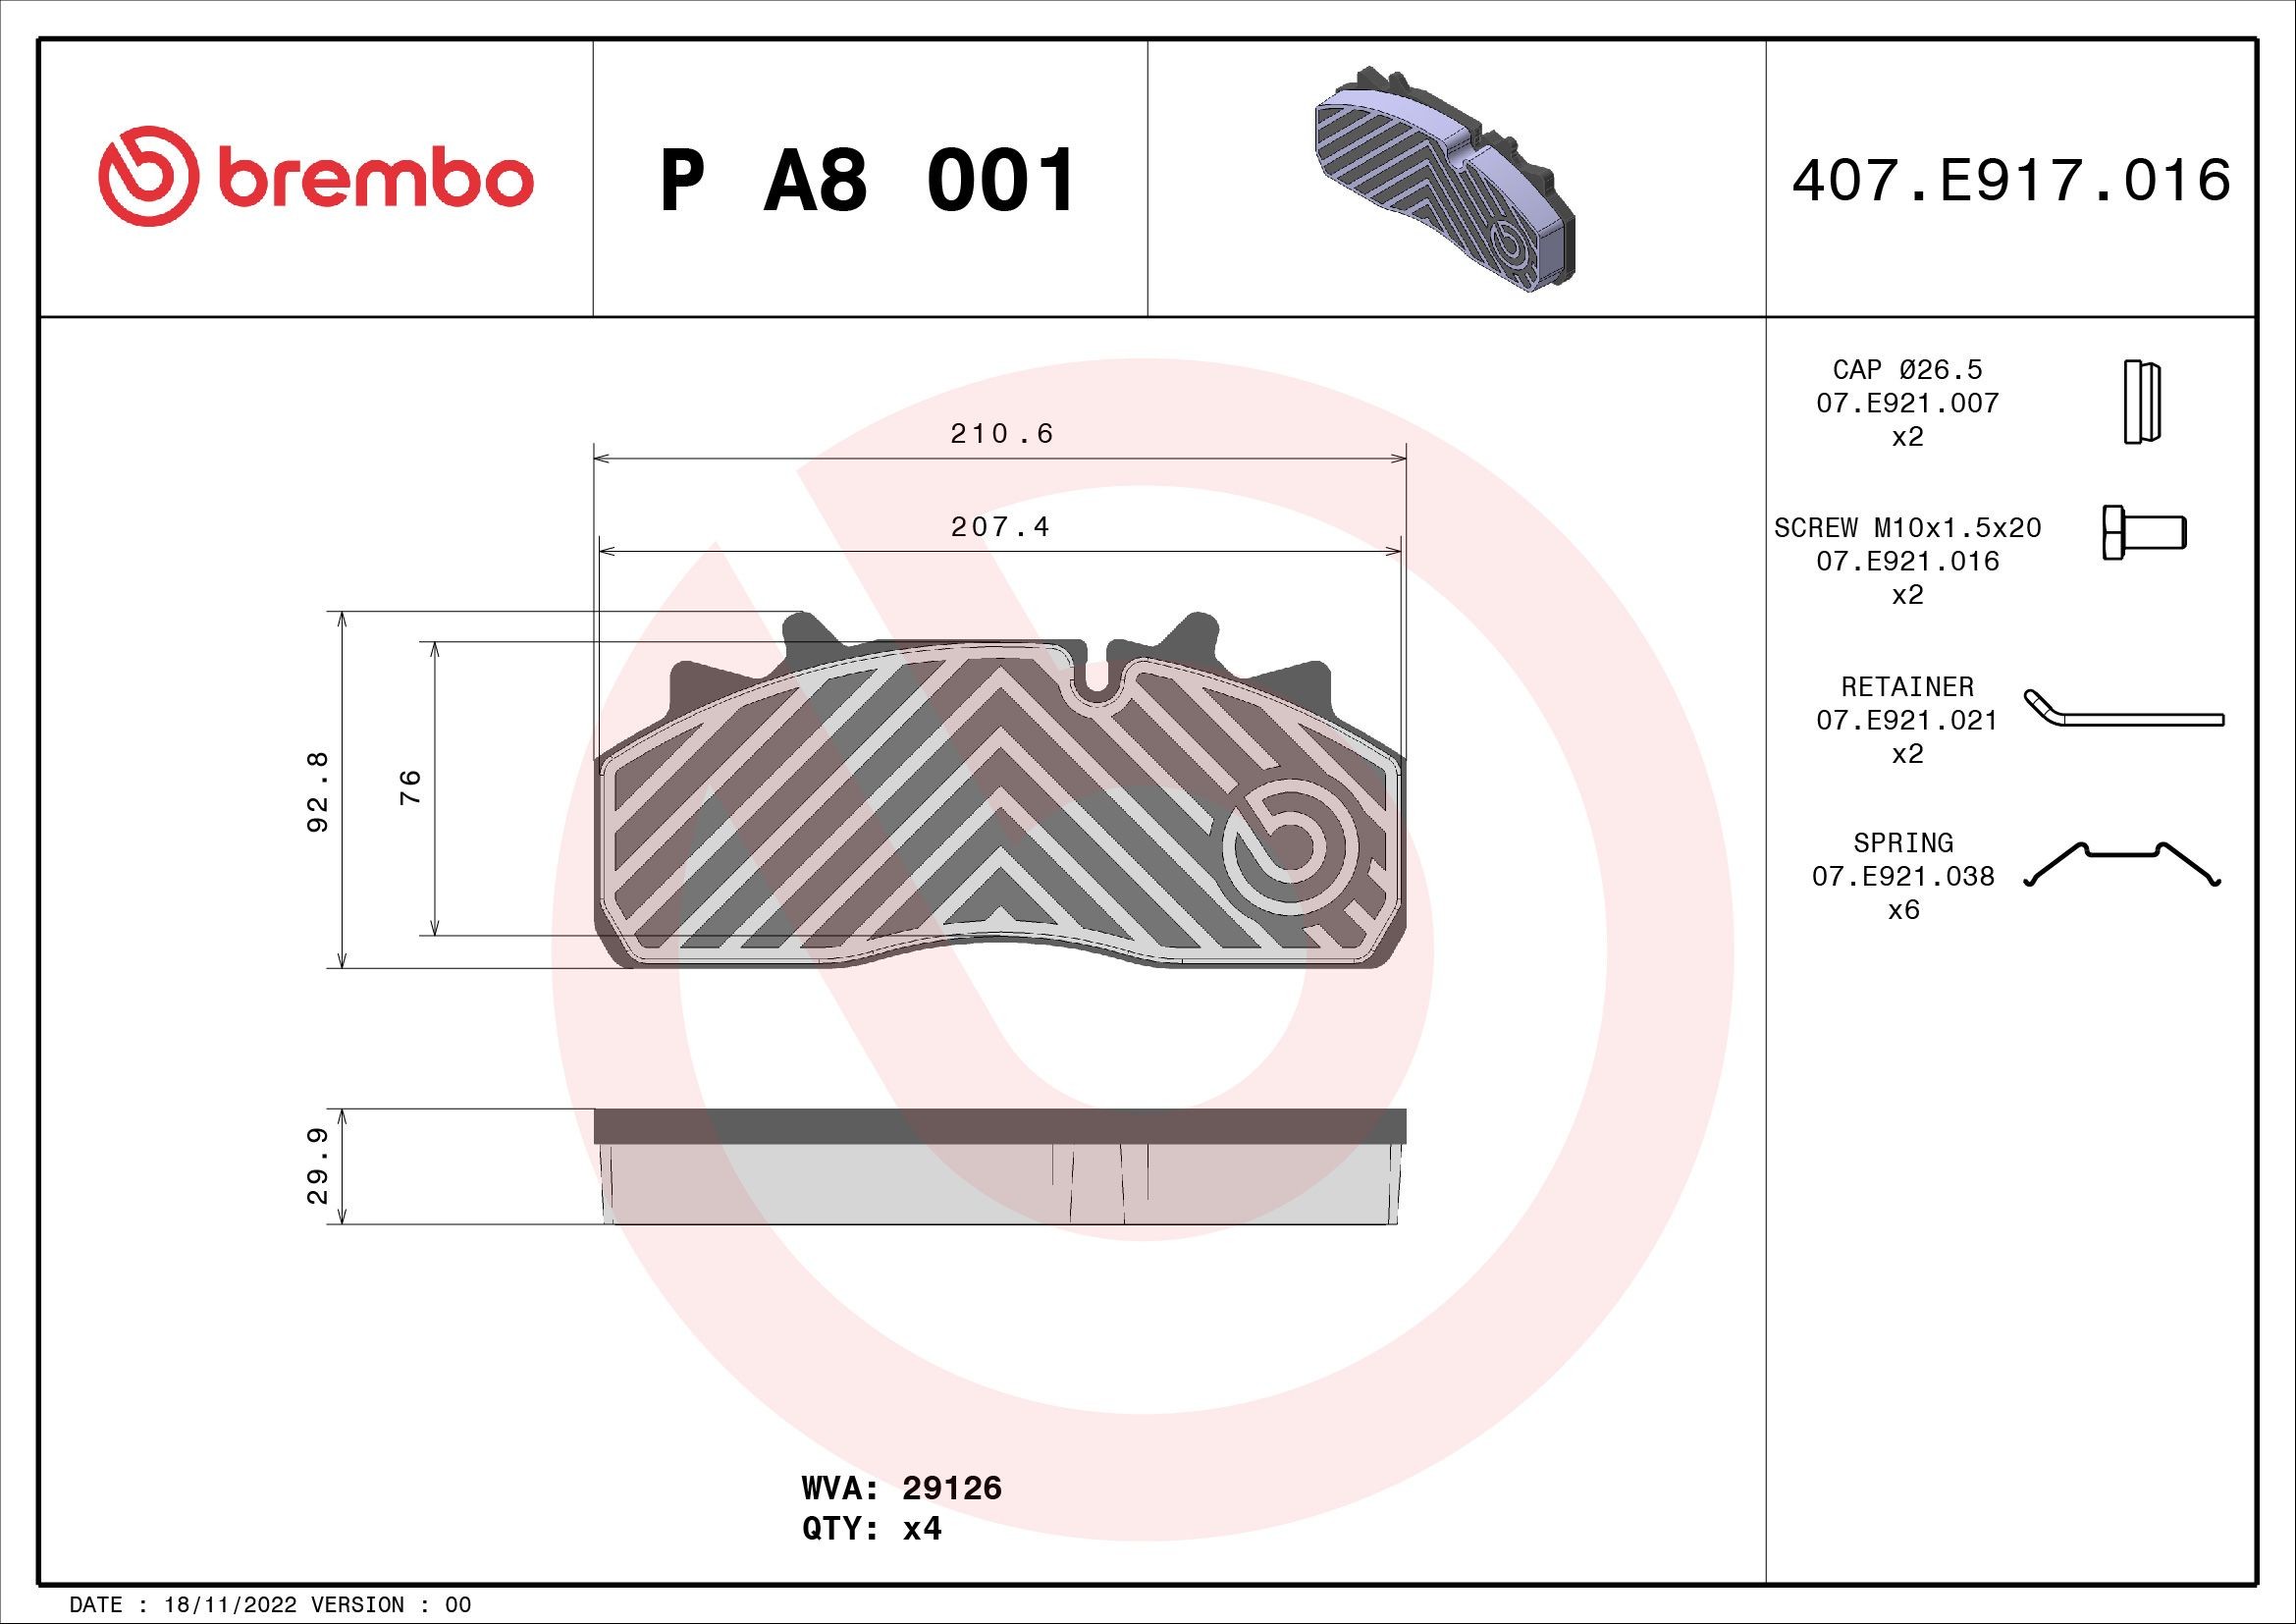 BREMBO P A8 001 Brake pad set prepared for wear indicator, with accessories